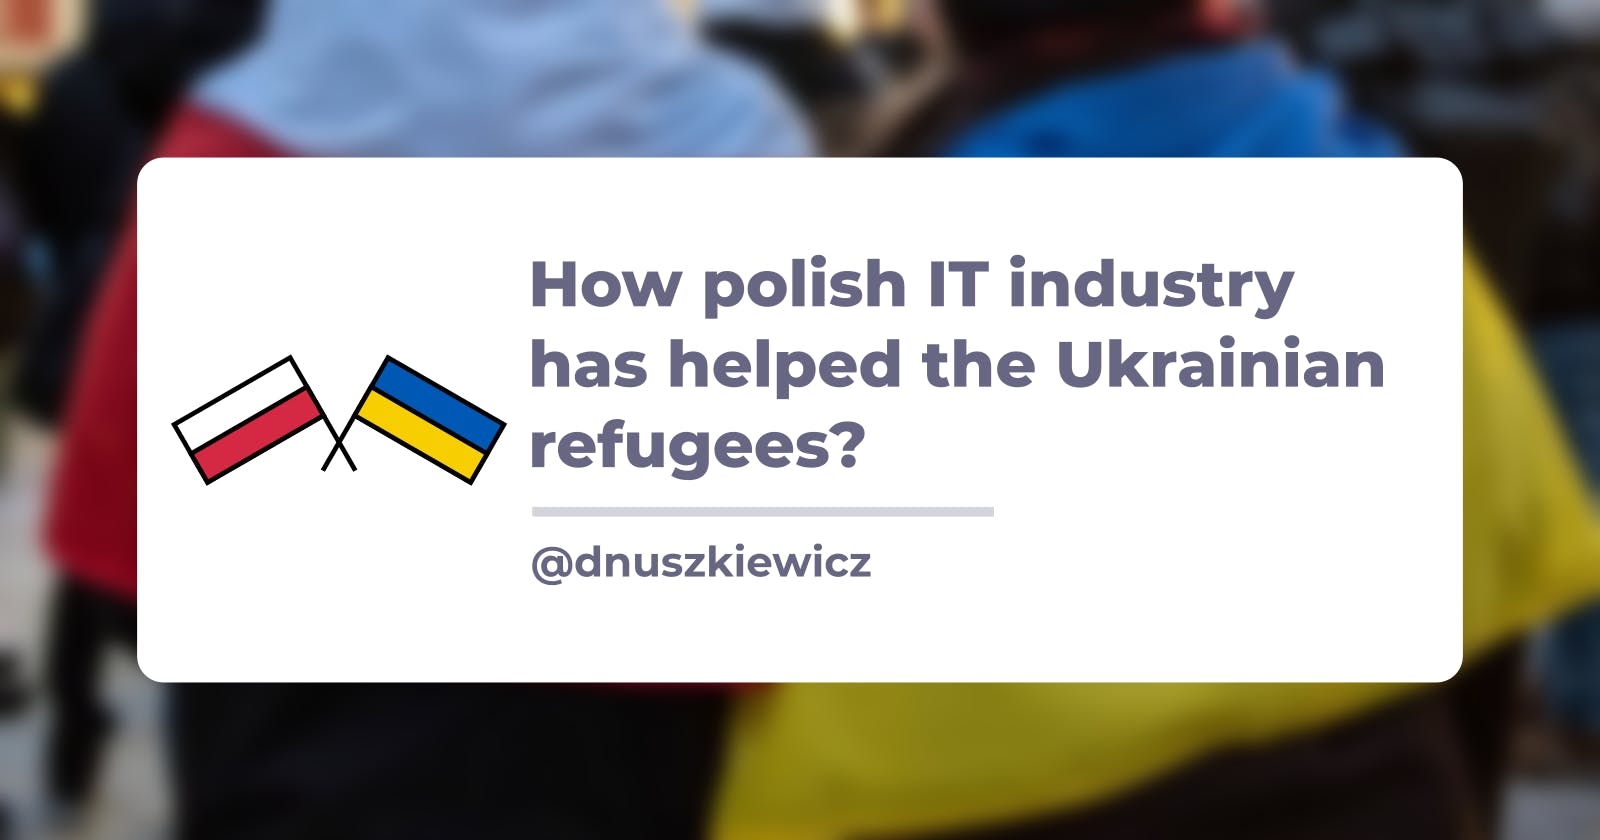 How polish IT industry has helped the Ukrainian refugees?